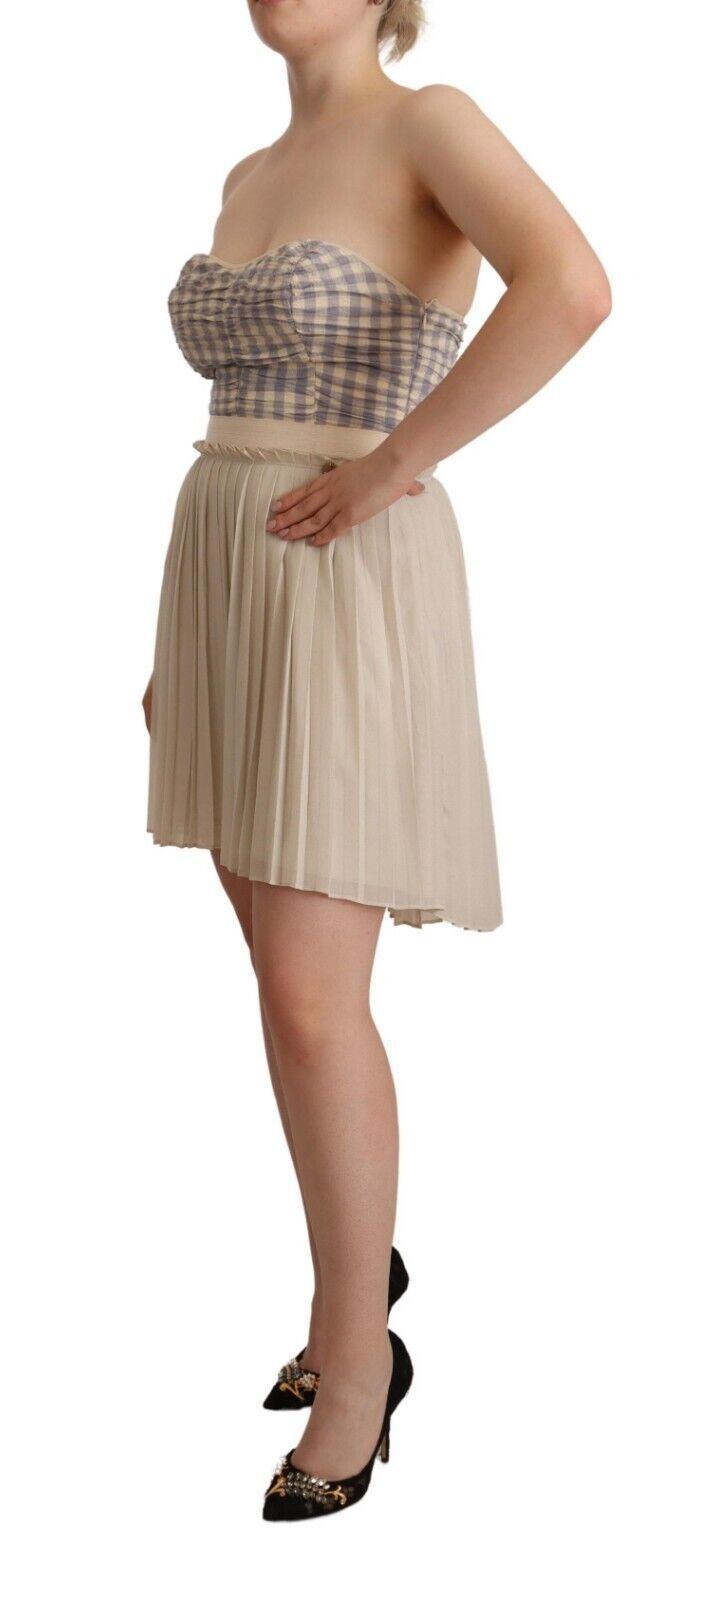 Guess Chic Beige Strapless A-Line Dress - PER.FASHION